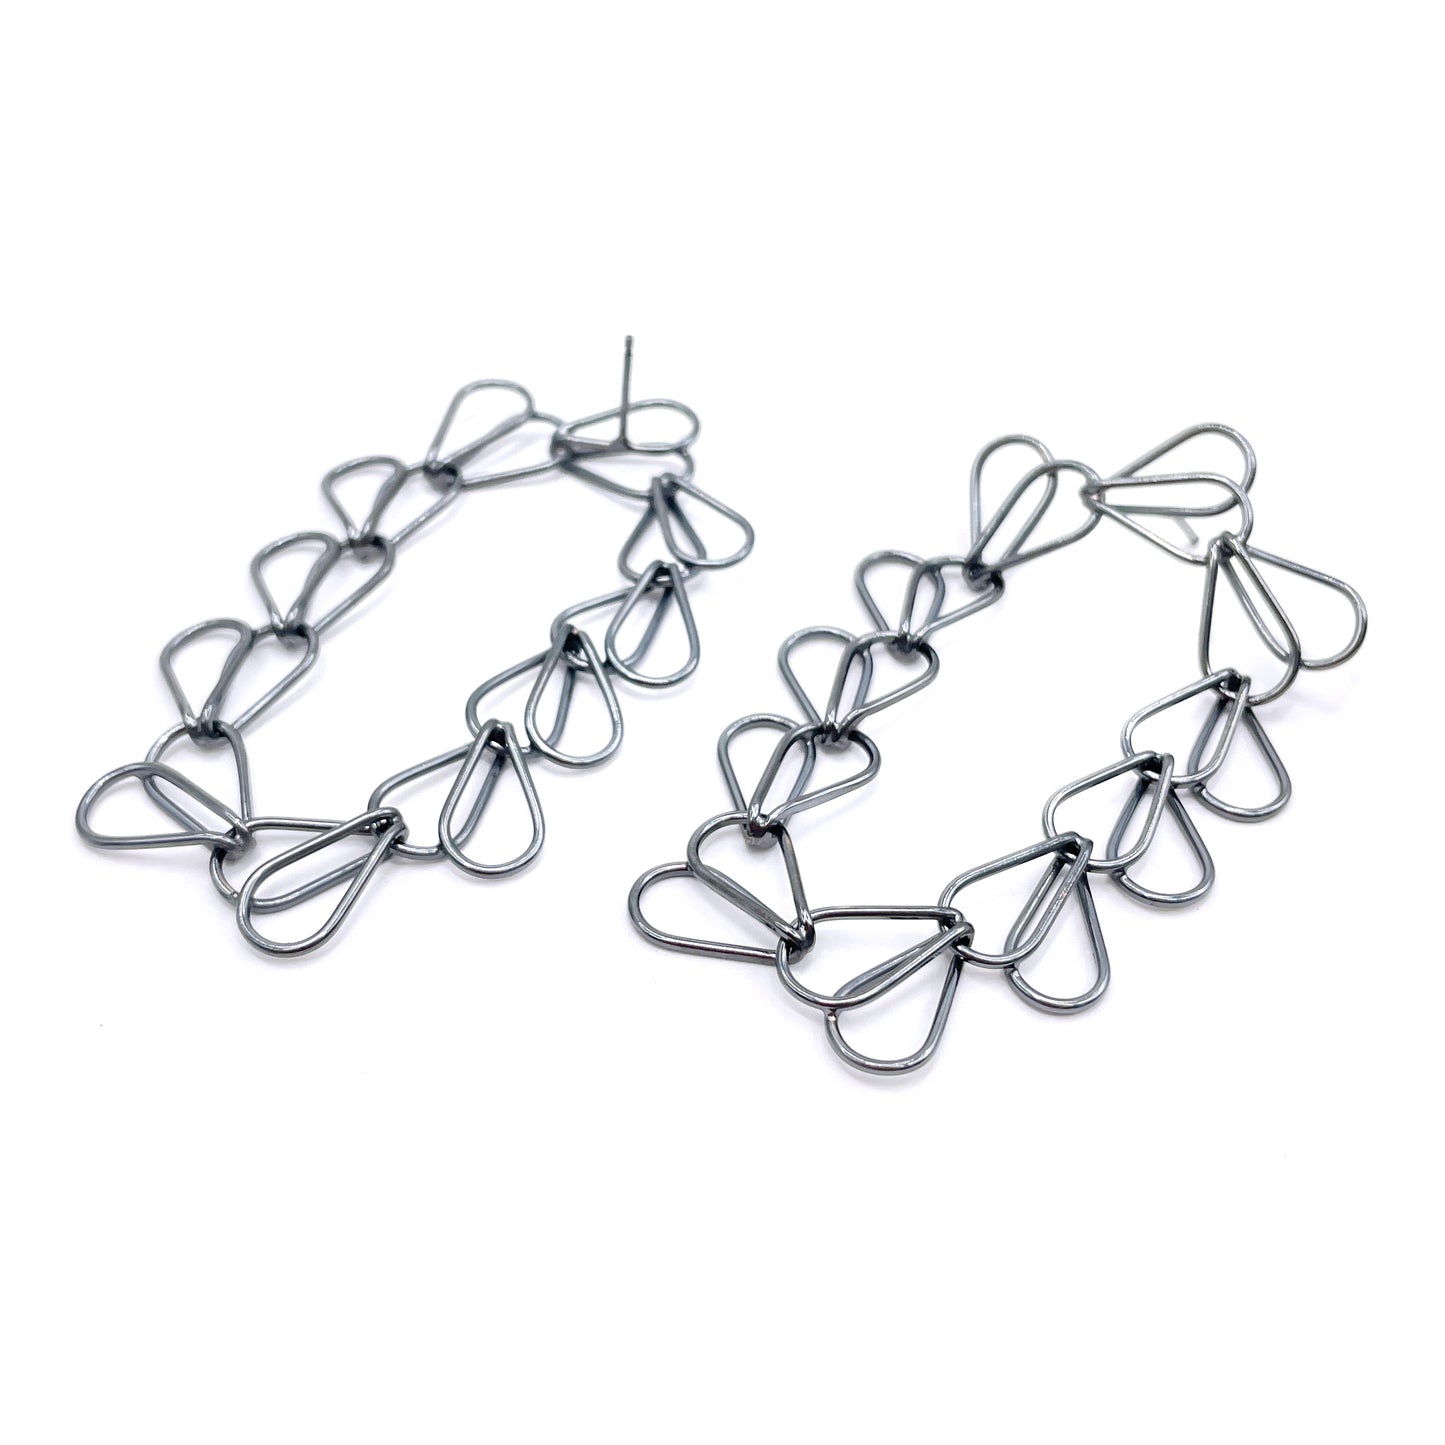 Splayed Link Earrings (Small)